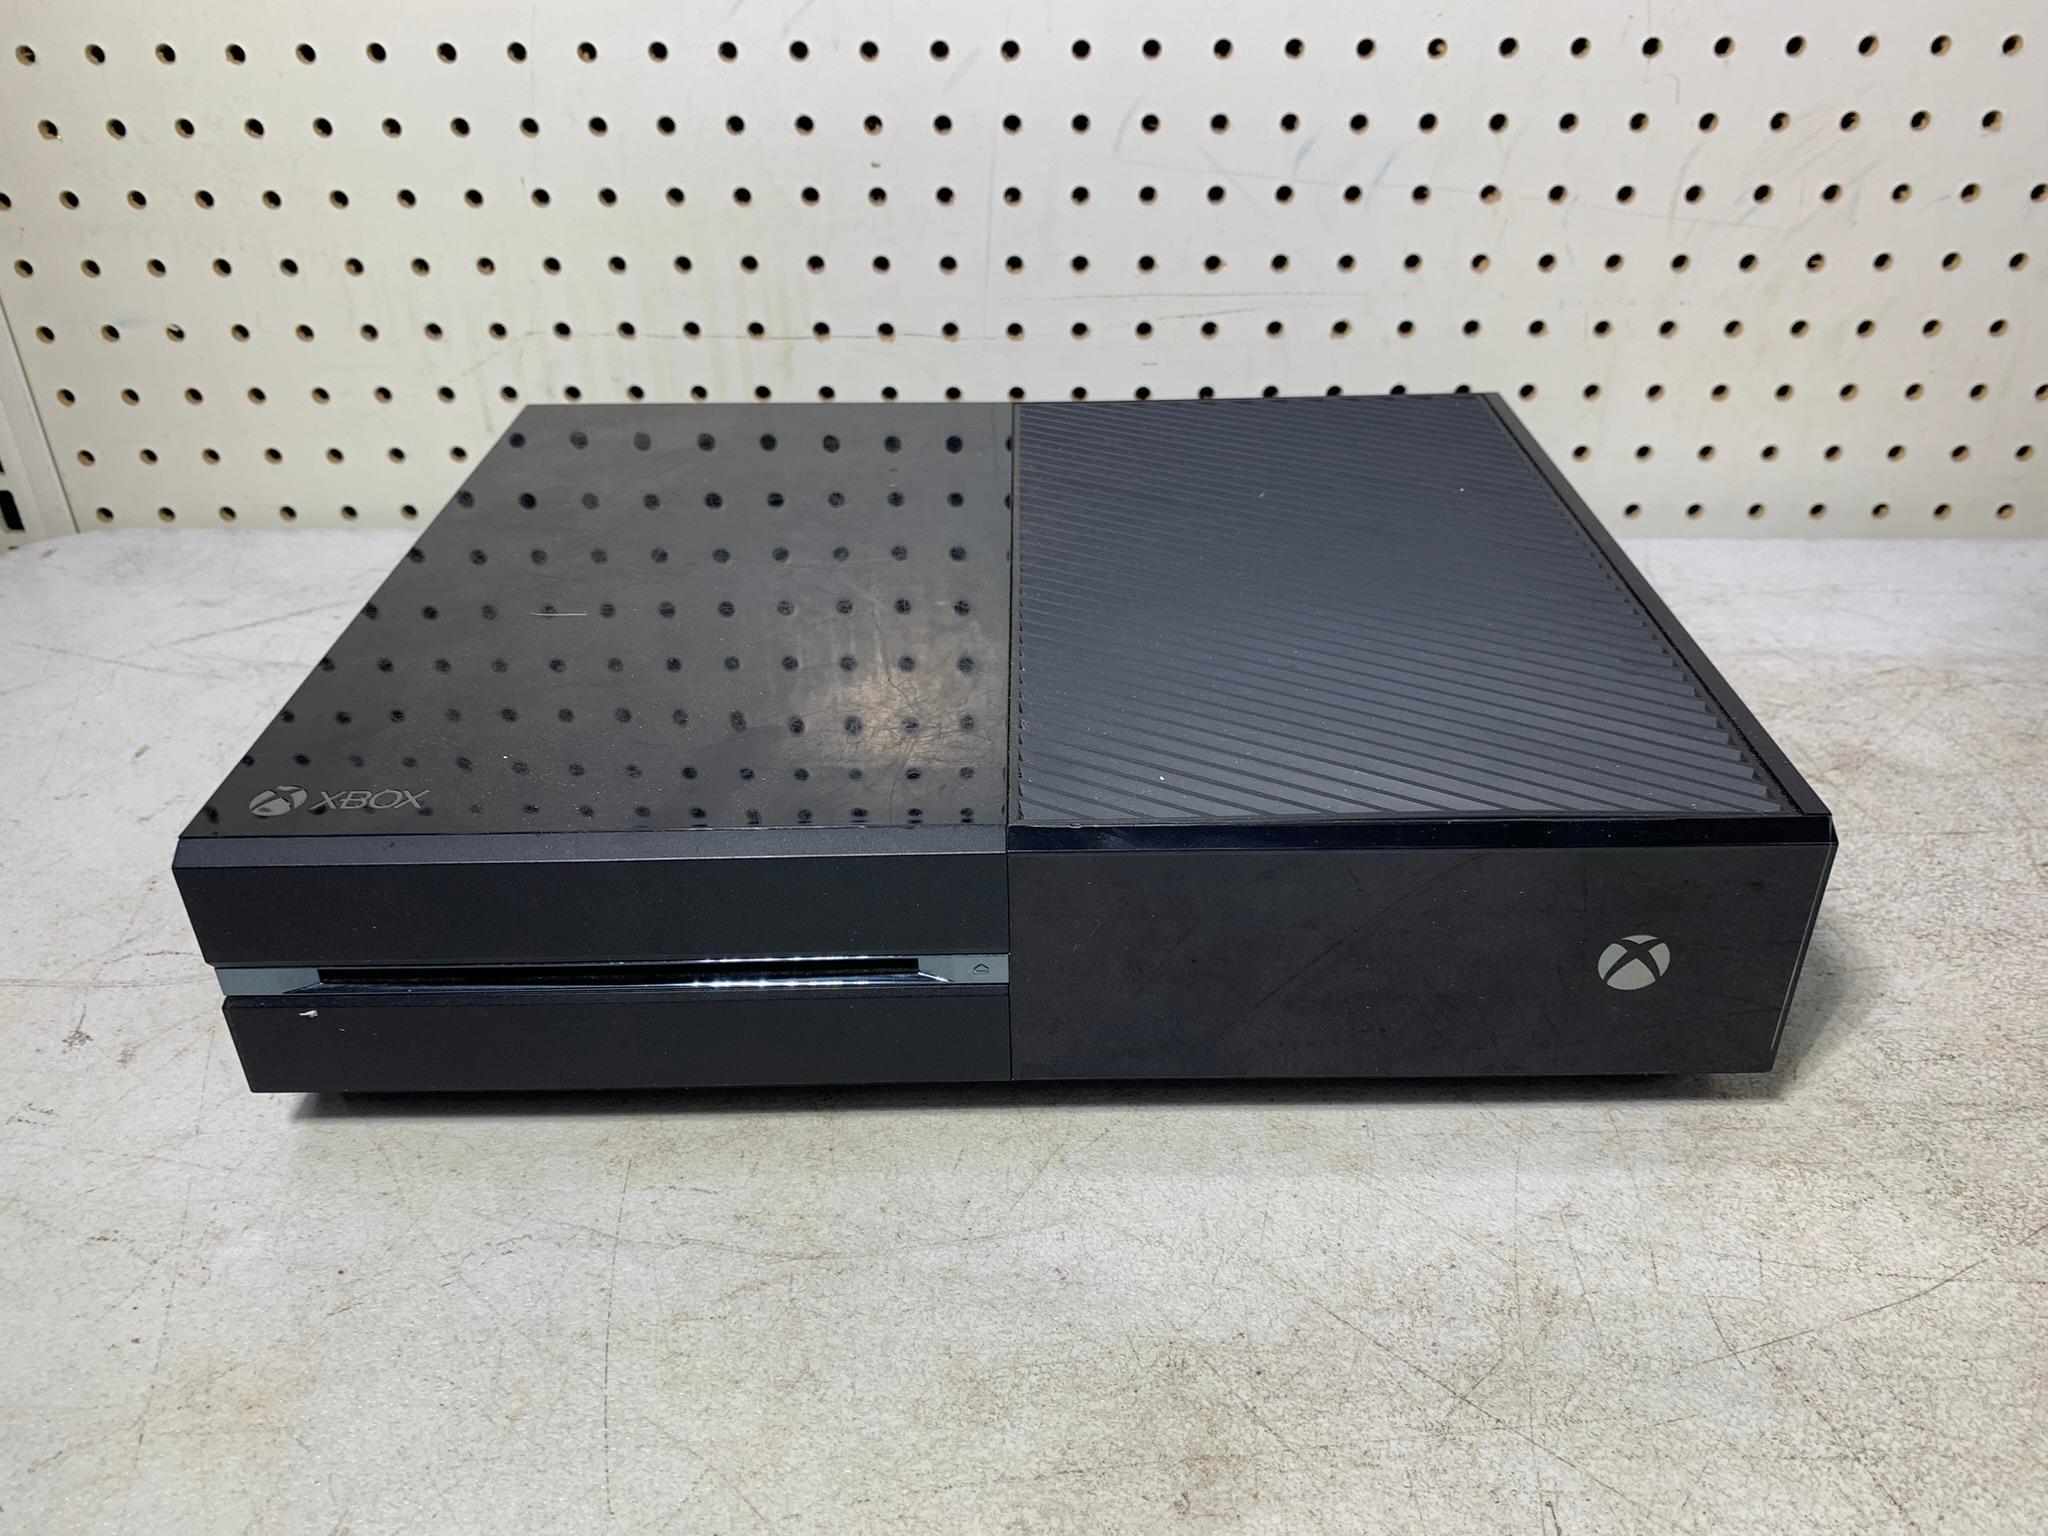 Microsoft XBOX ONE Console with Controller & Cords